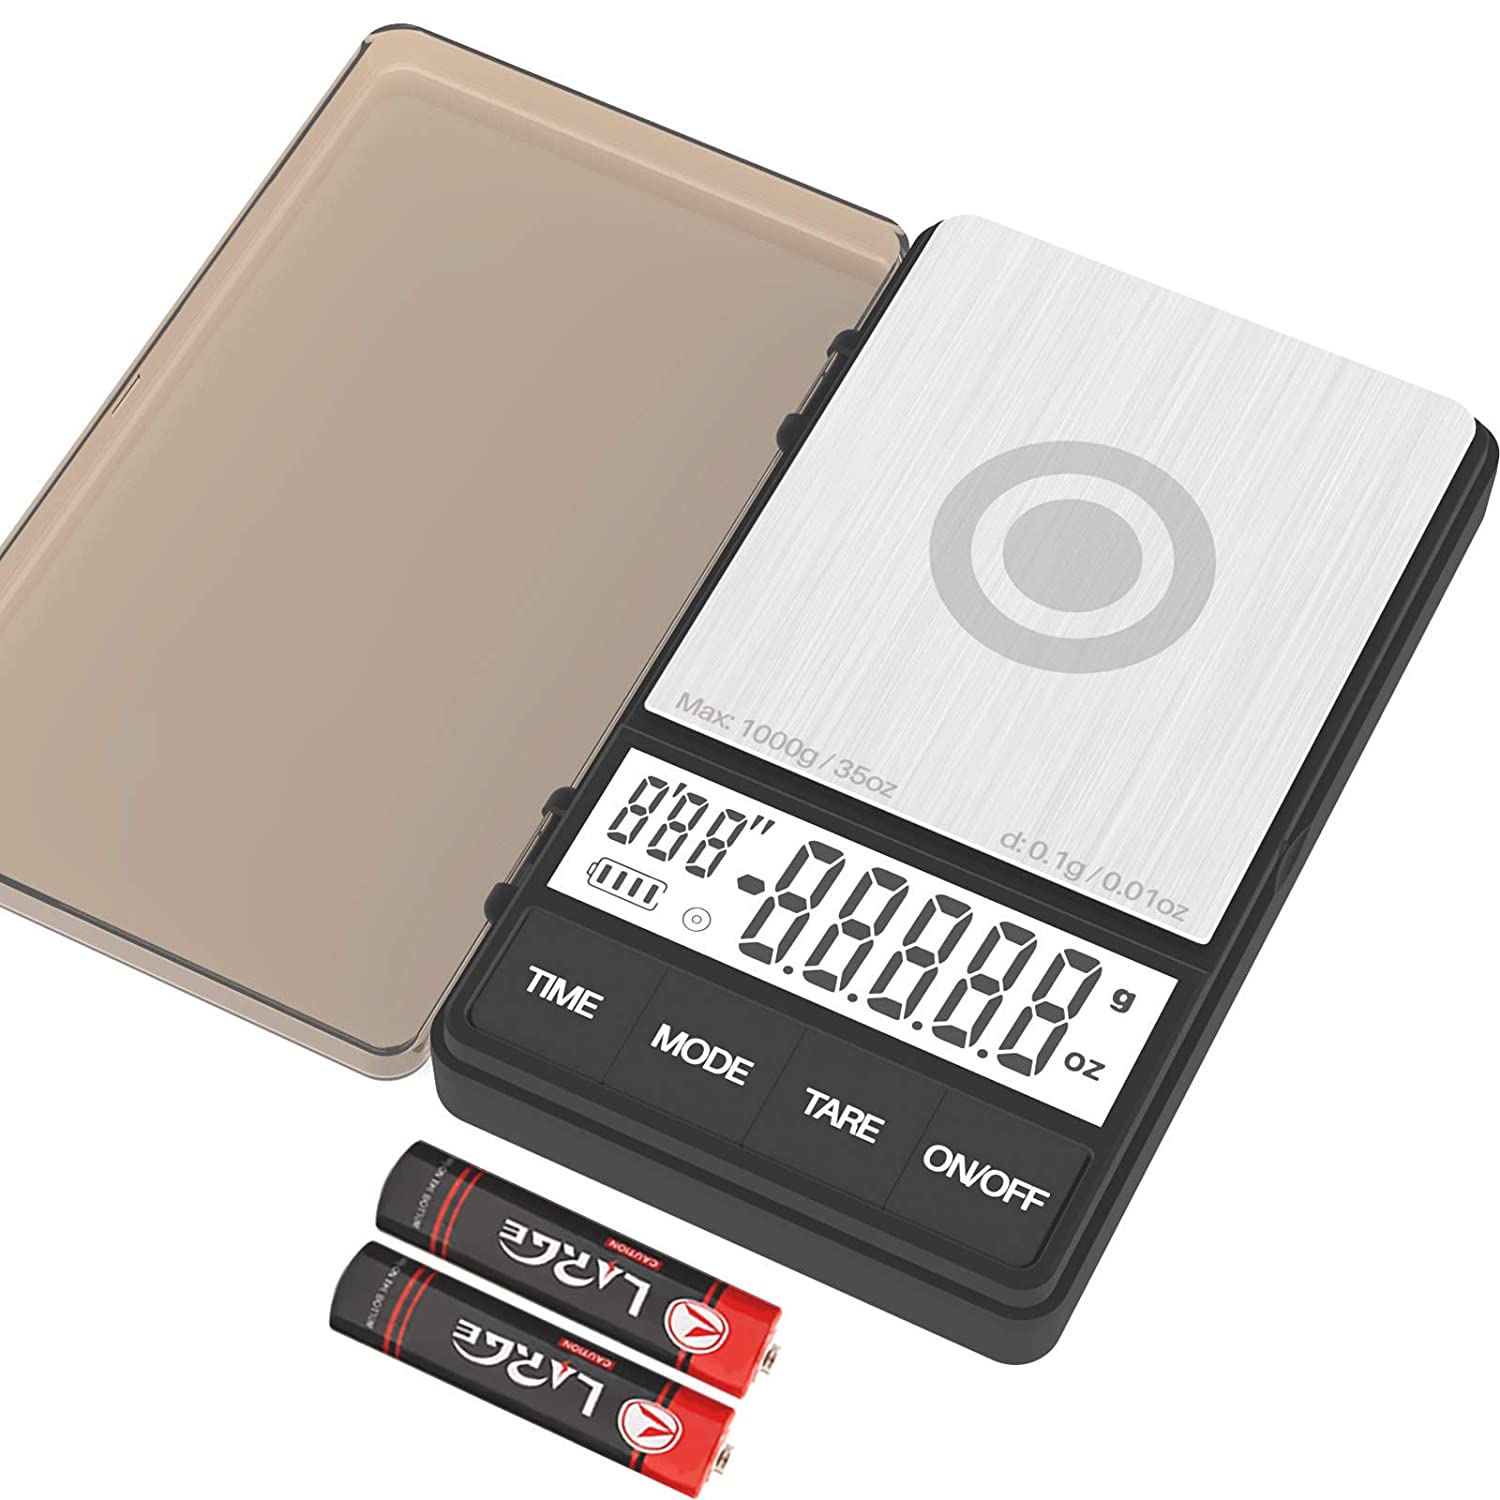 digital coffee scale with batteries taken out